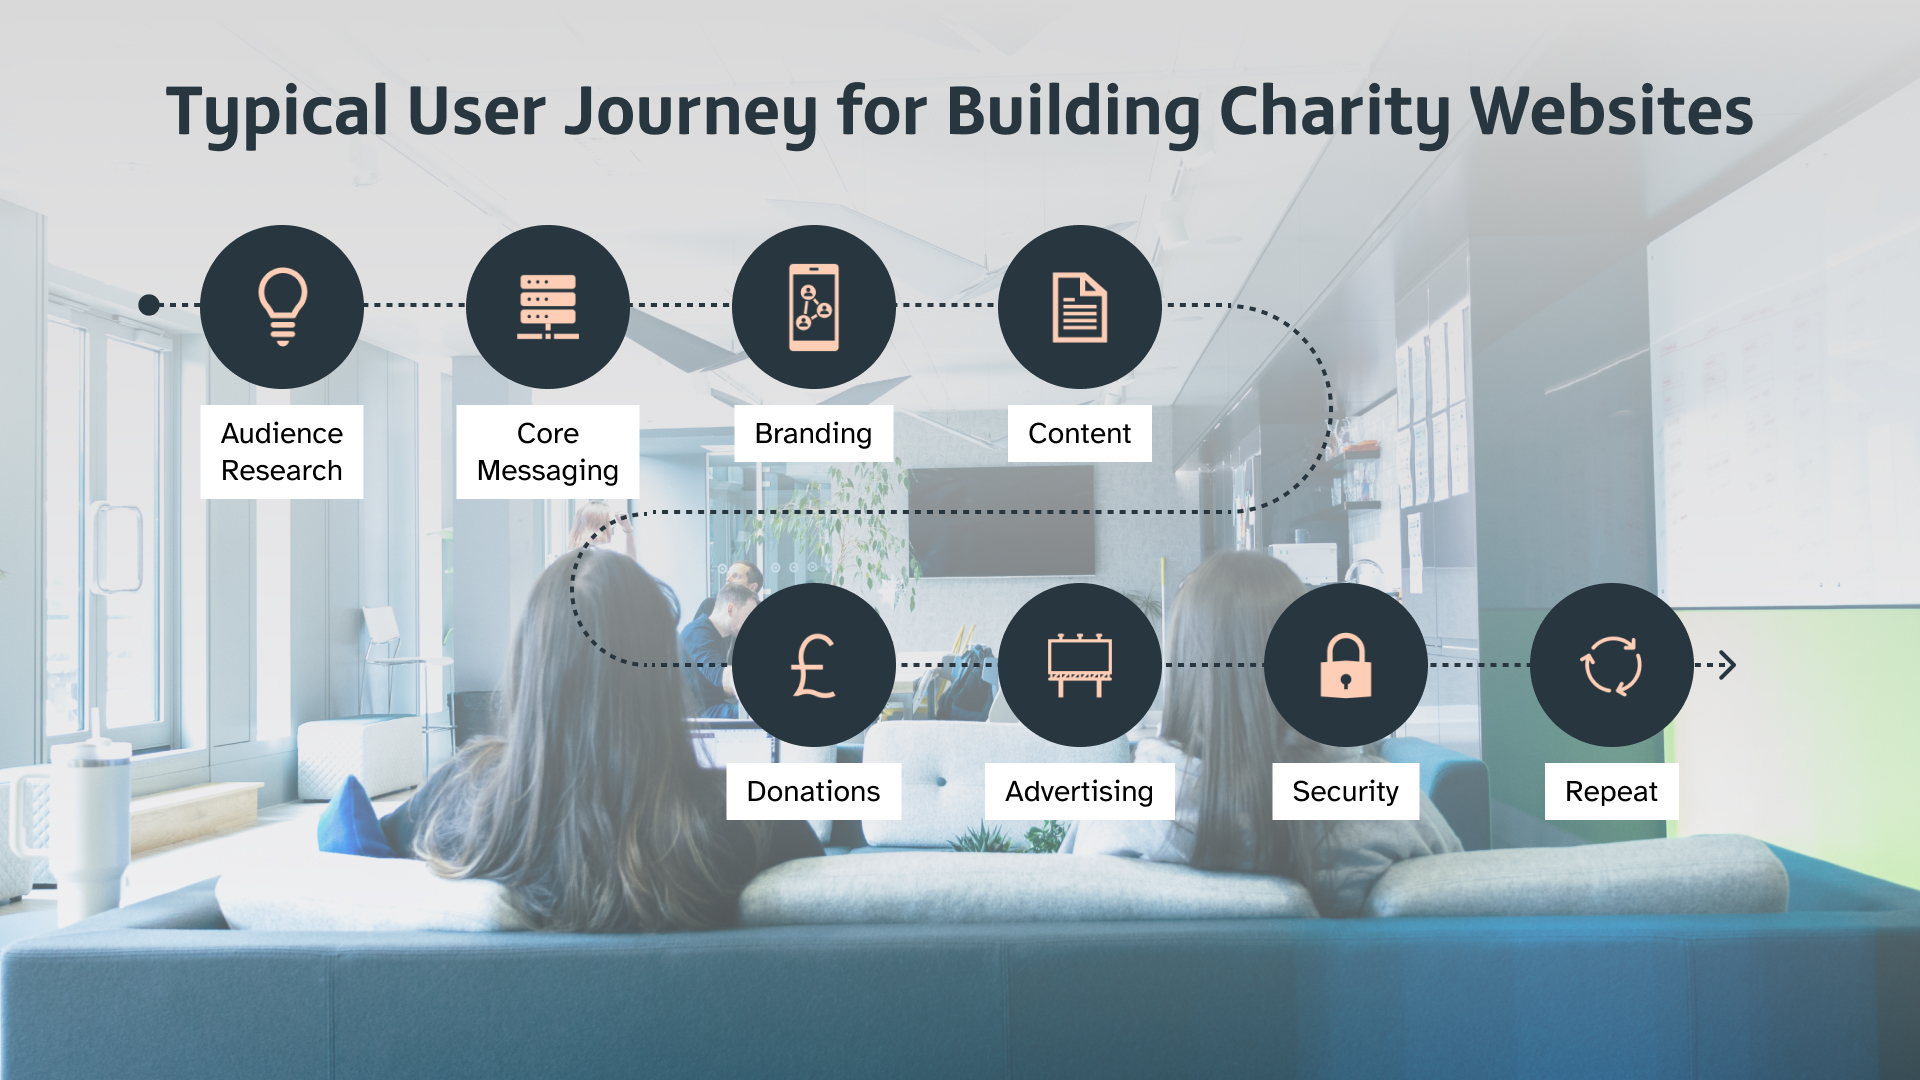 Typical User Journey for Building Charity Websites: 1) Audience Research; 2) Core Messaging; 3) Branding; 4) Content; 5) Donations; 6) Advertising; 7) Security; 8) Repeat